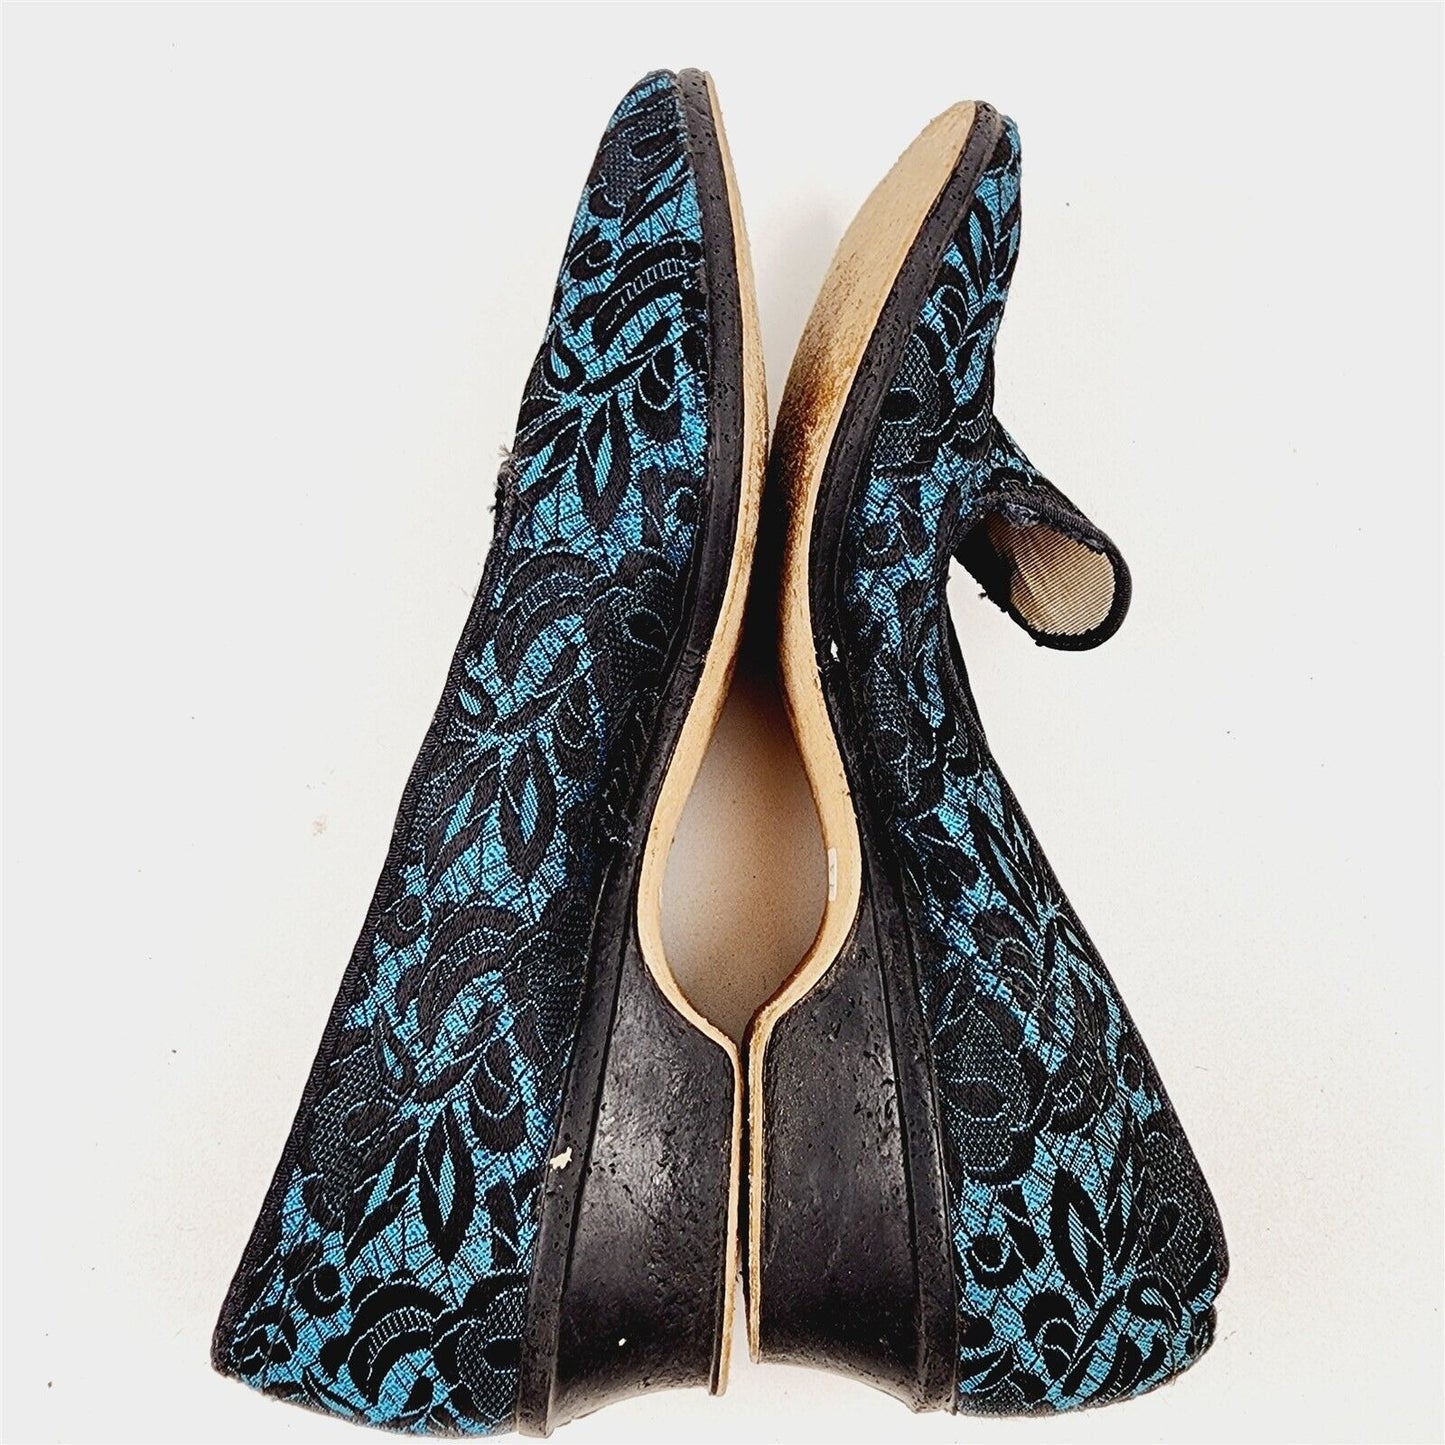 Vintage Black & Blue Wellco Brocade Embroidered Shoes Slippers Size 6